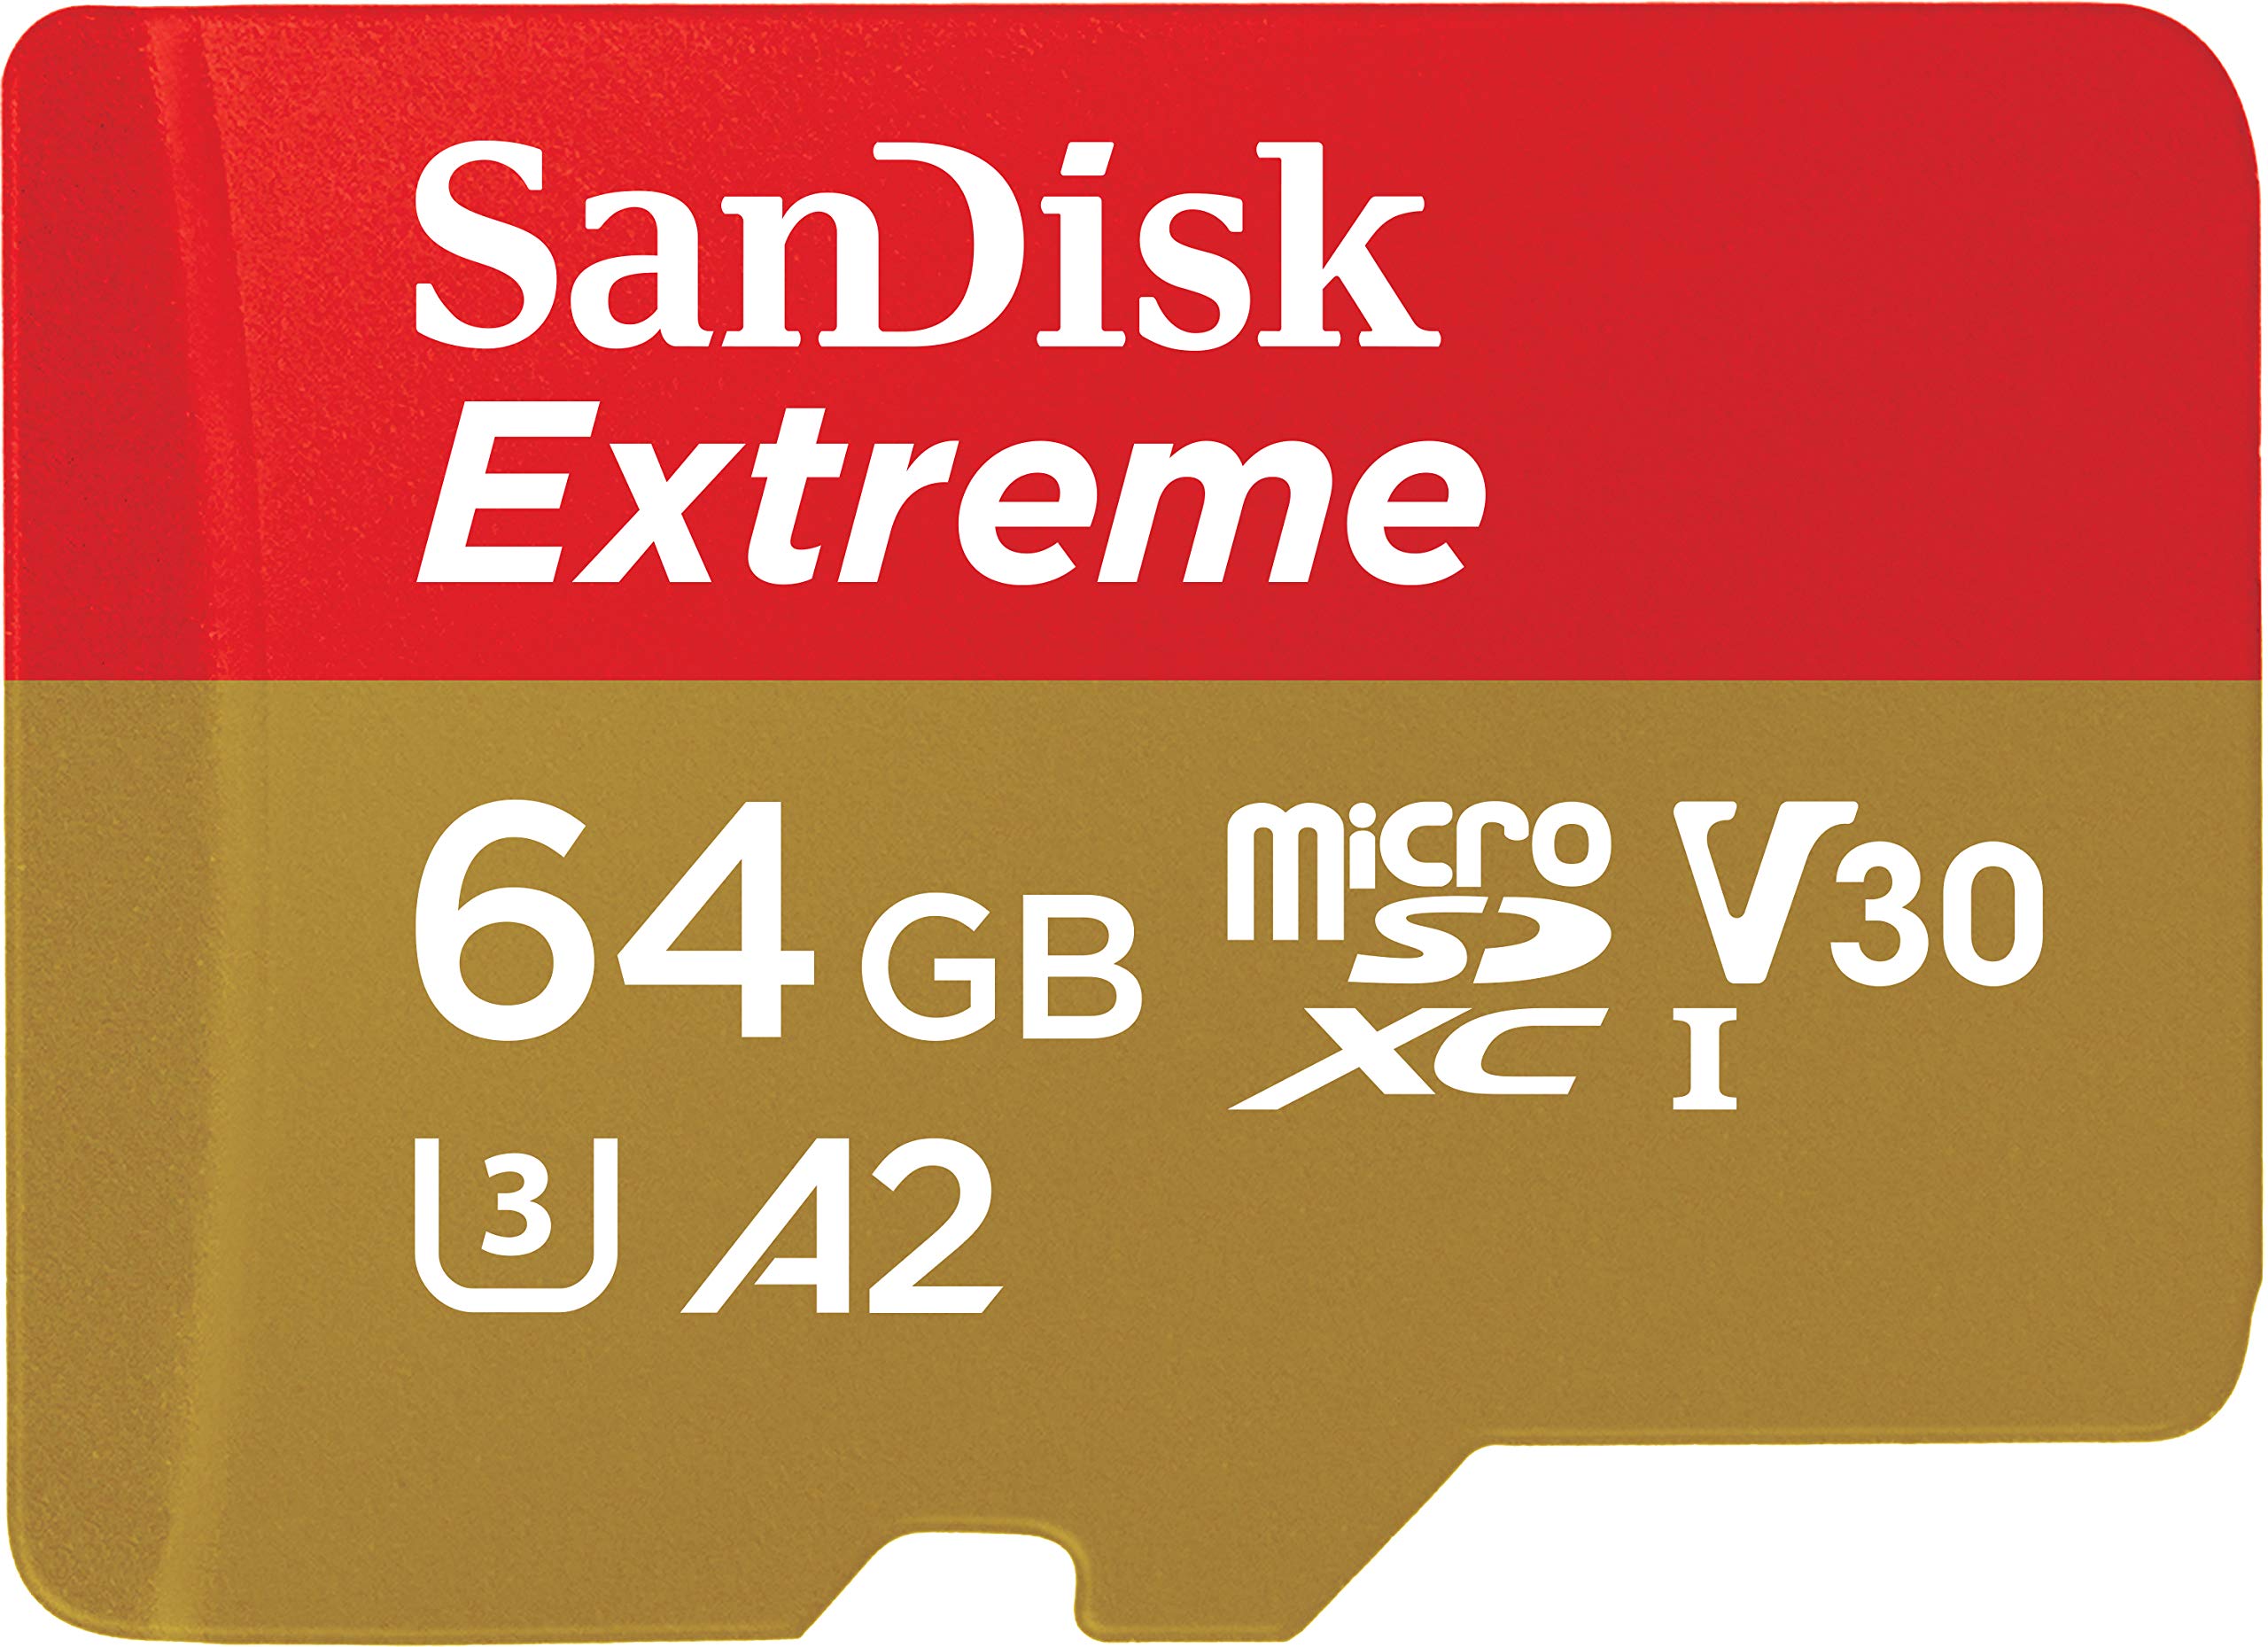 SanDisk 64GB Extreme microSD UHS-I Card with Adapter - U3 A2